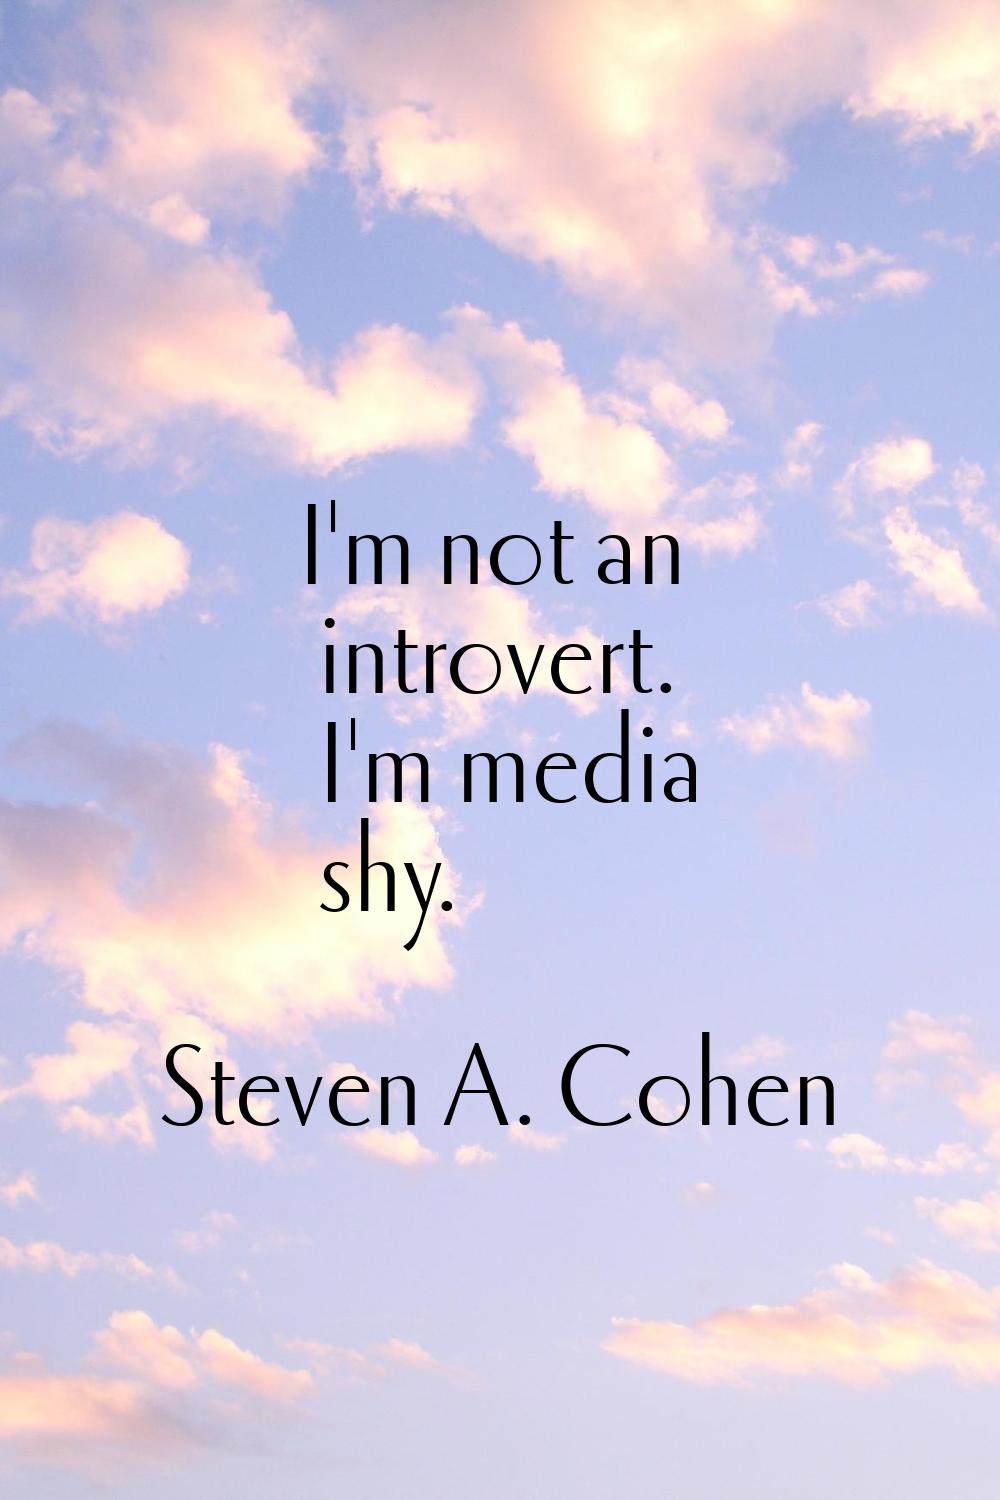 I'm not an introvert. I'm media shy.